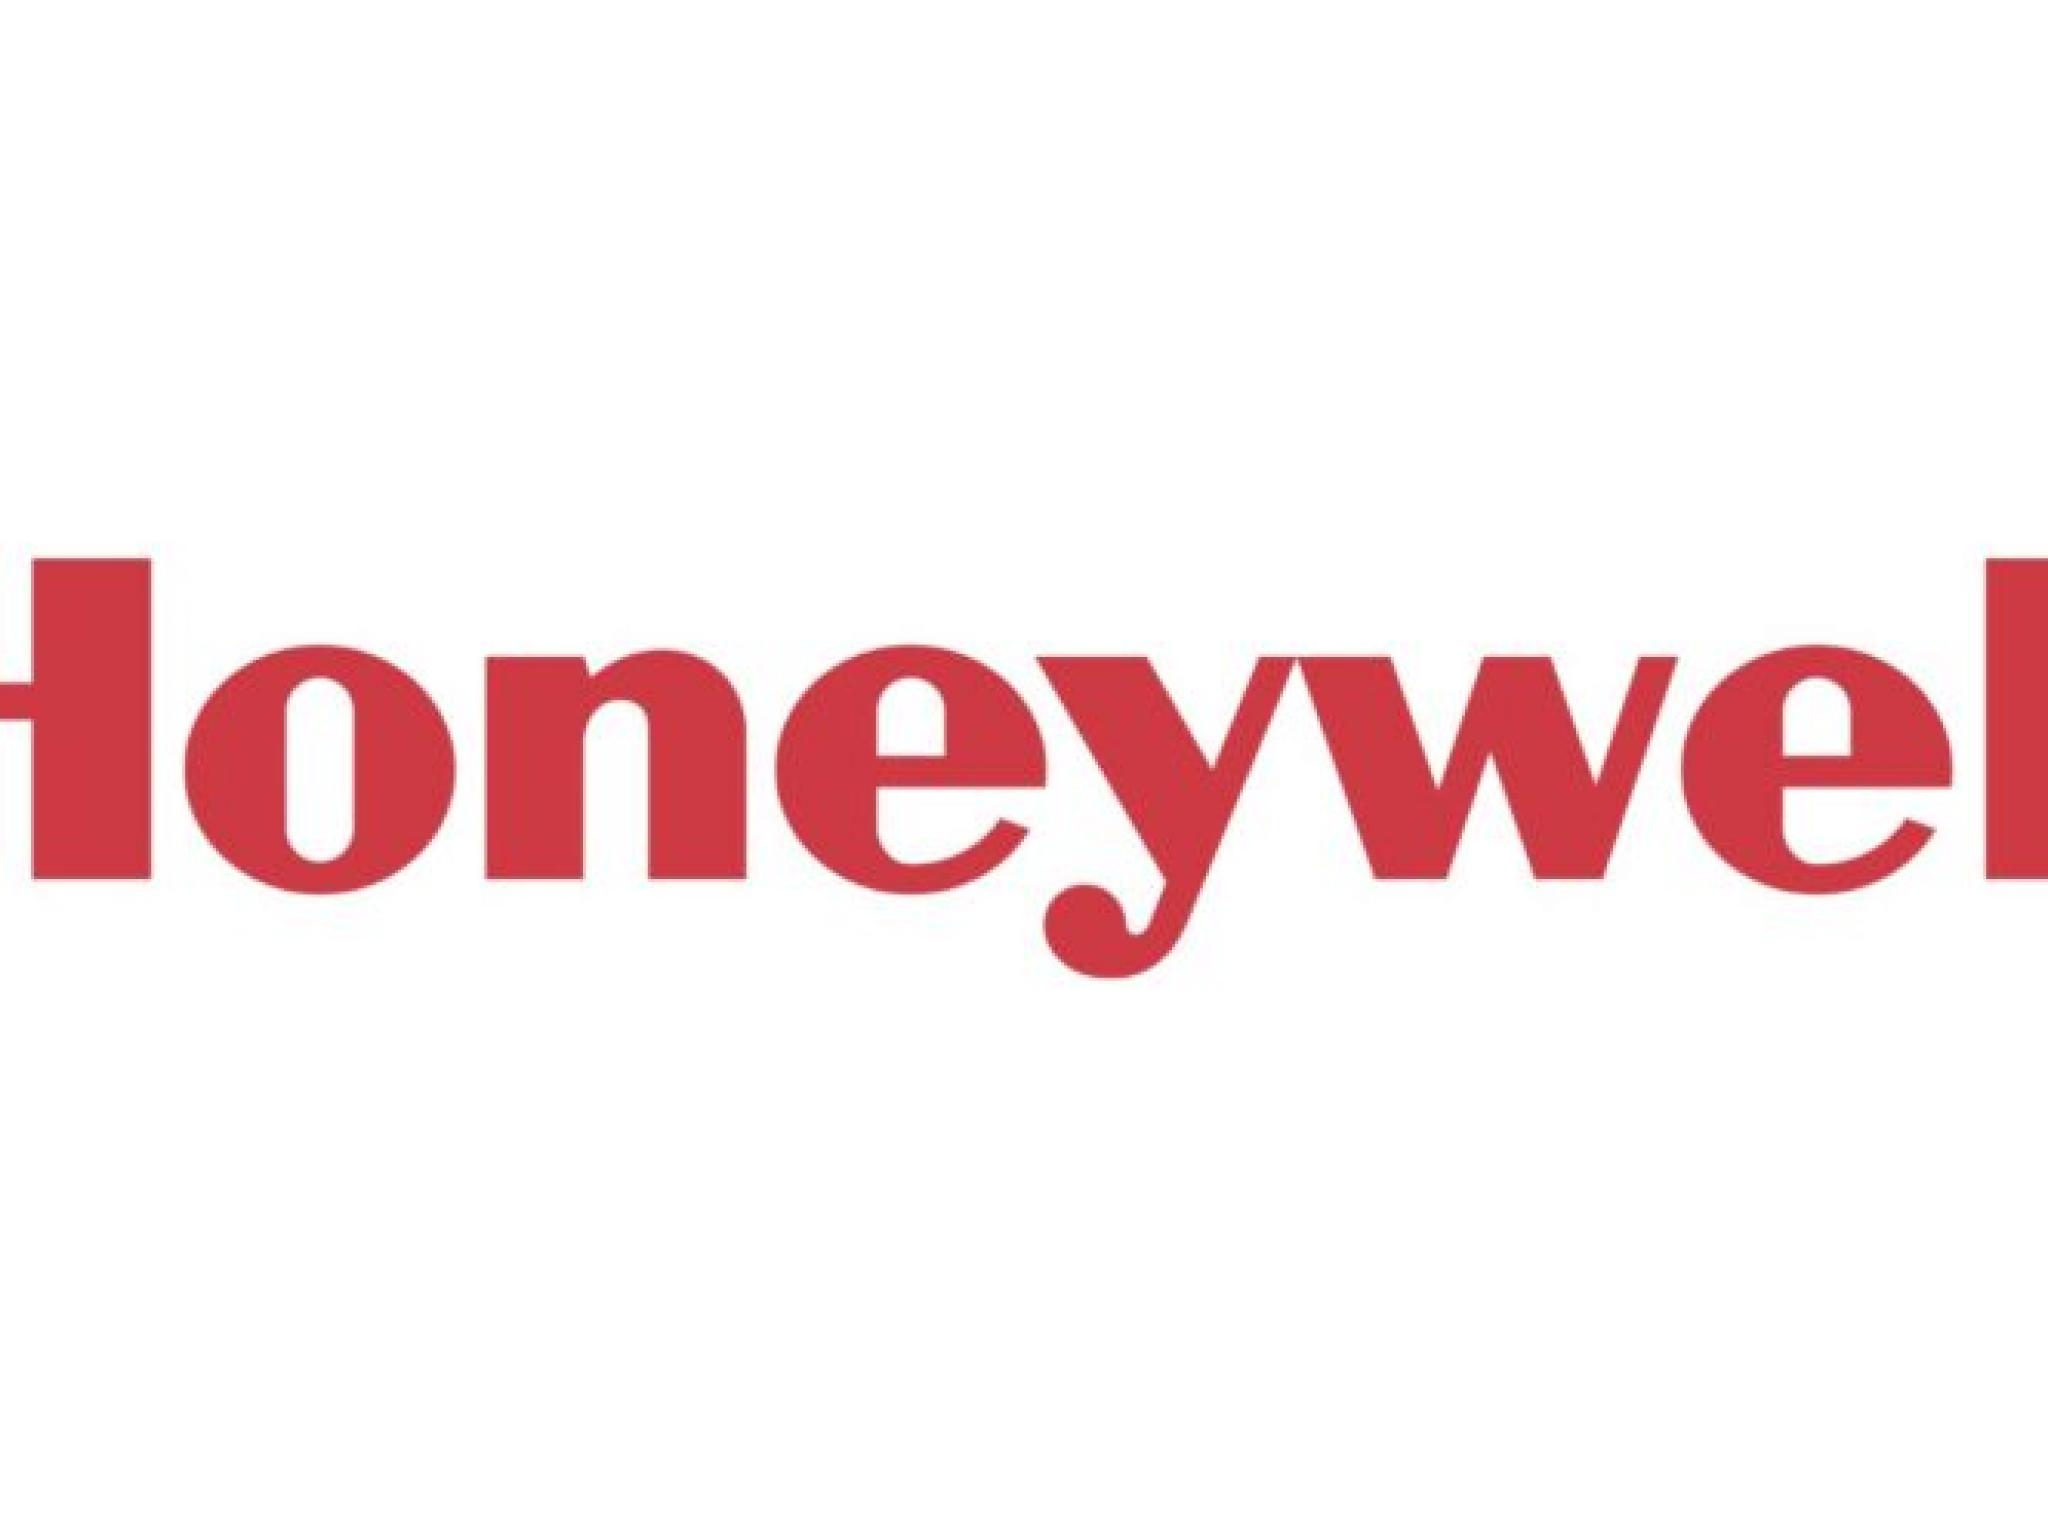  honeywell-likely-to-report-higher-q1-earnings-here-are-the-recent-forecast-changes-from-wall-streets-most-accurate-analysts 